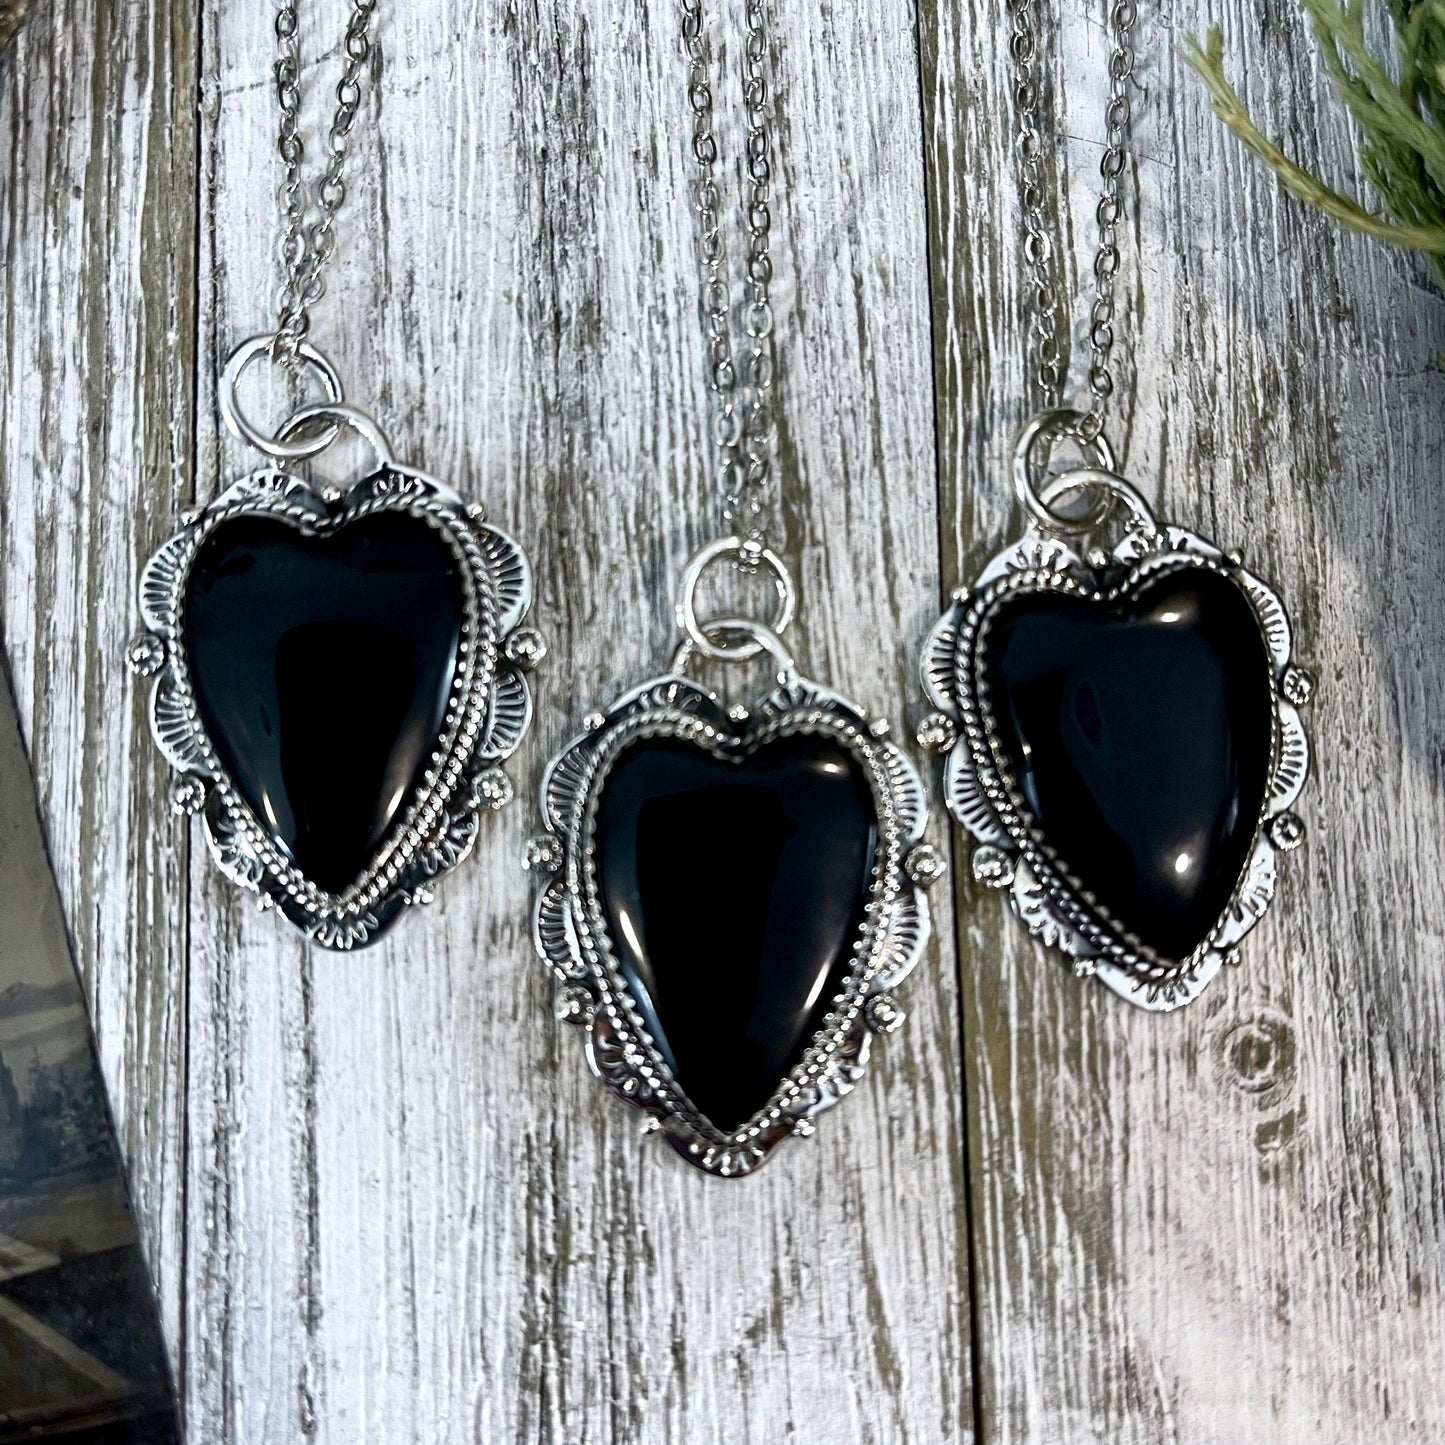 Black Onyx Crystal Heart Necklace in Sterling Silver  -Designed by FOXLARK Collection